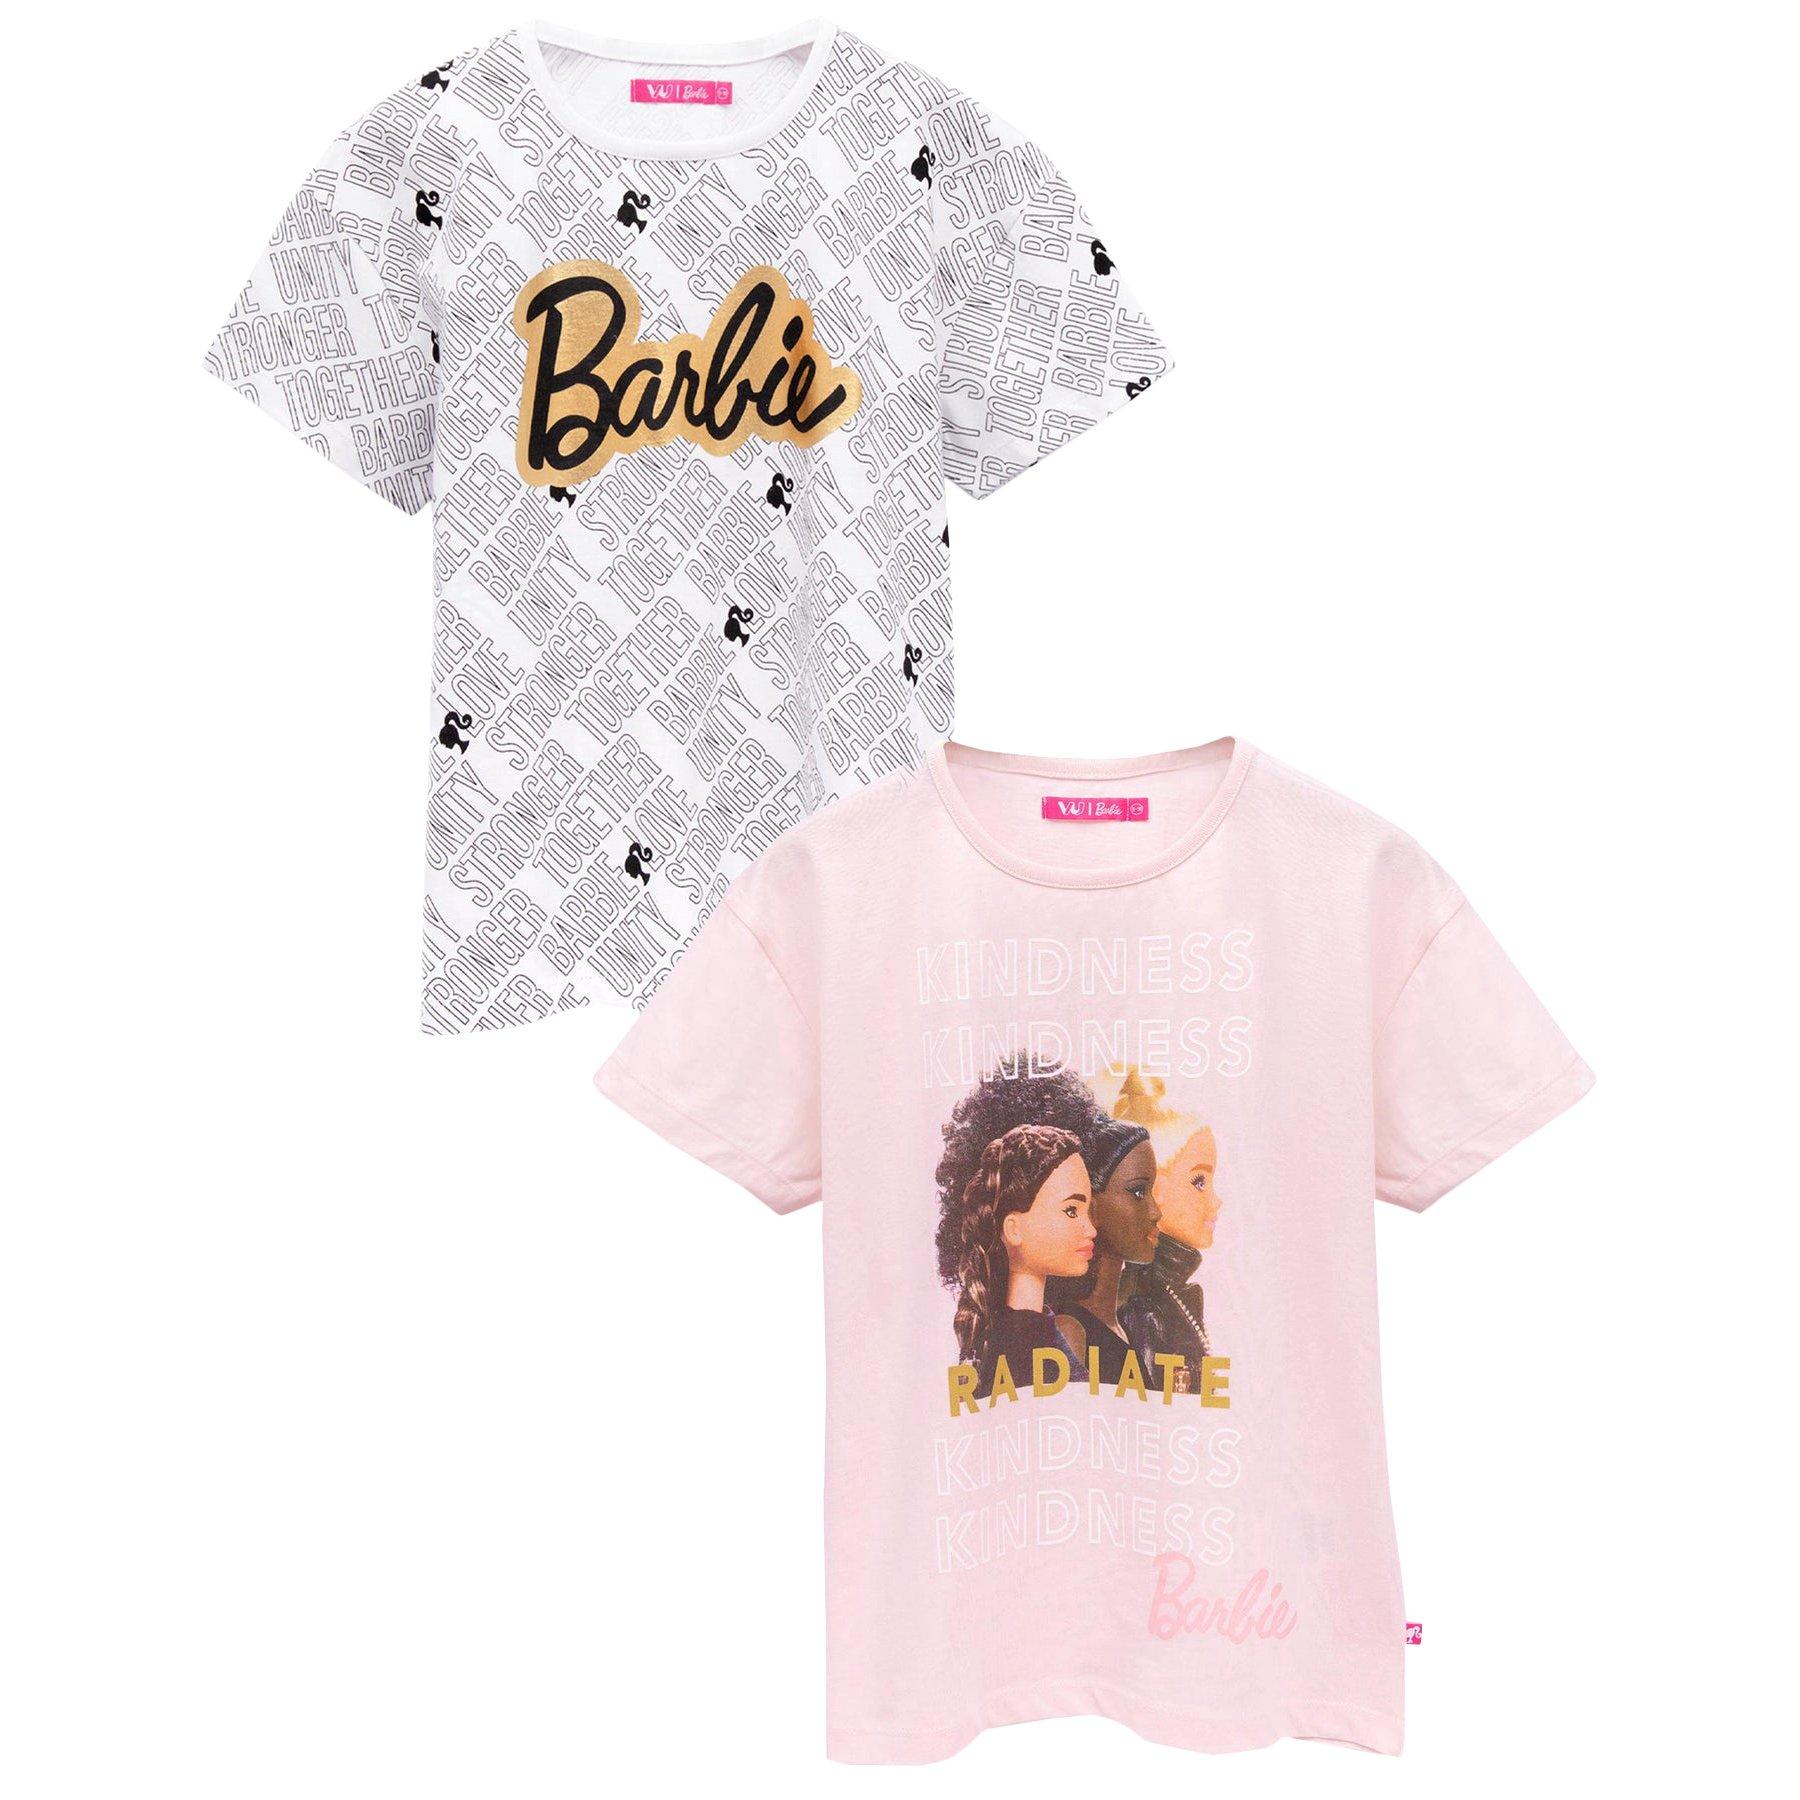 Kindness Stronger Together Unity And Love Tshirt Set (2erpack) Mädchen Weiss 140 von Barbie